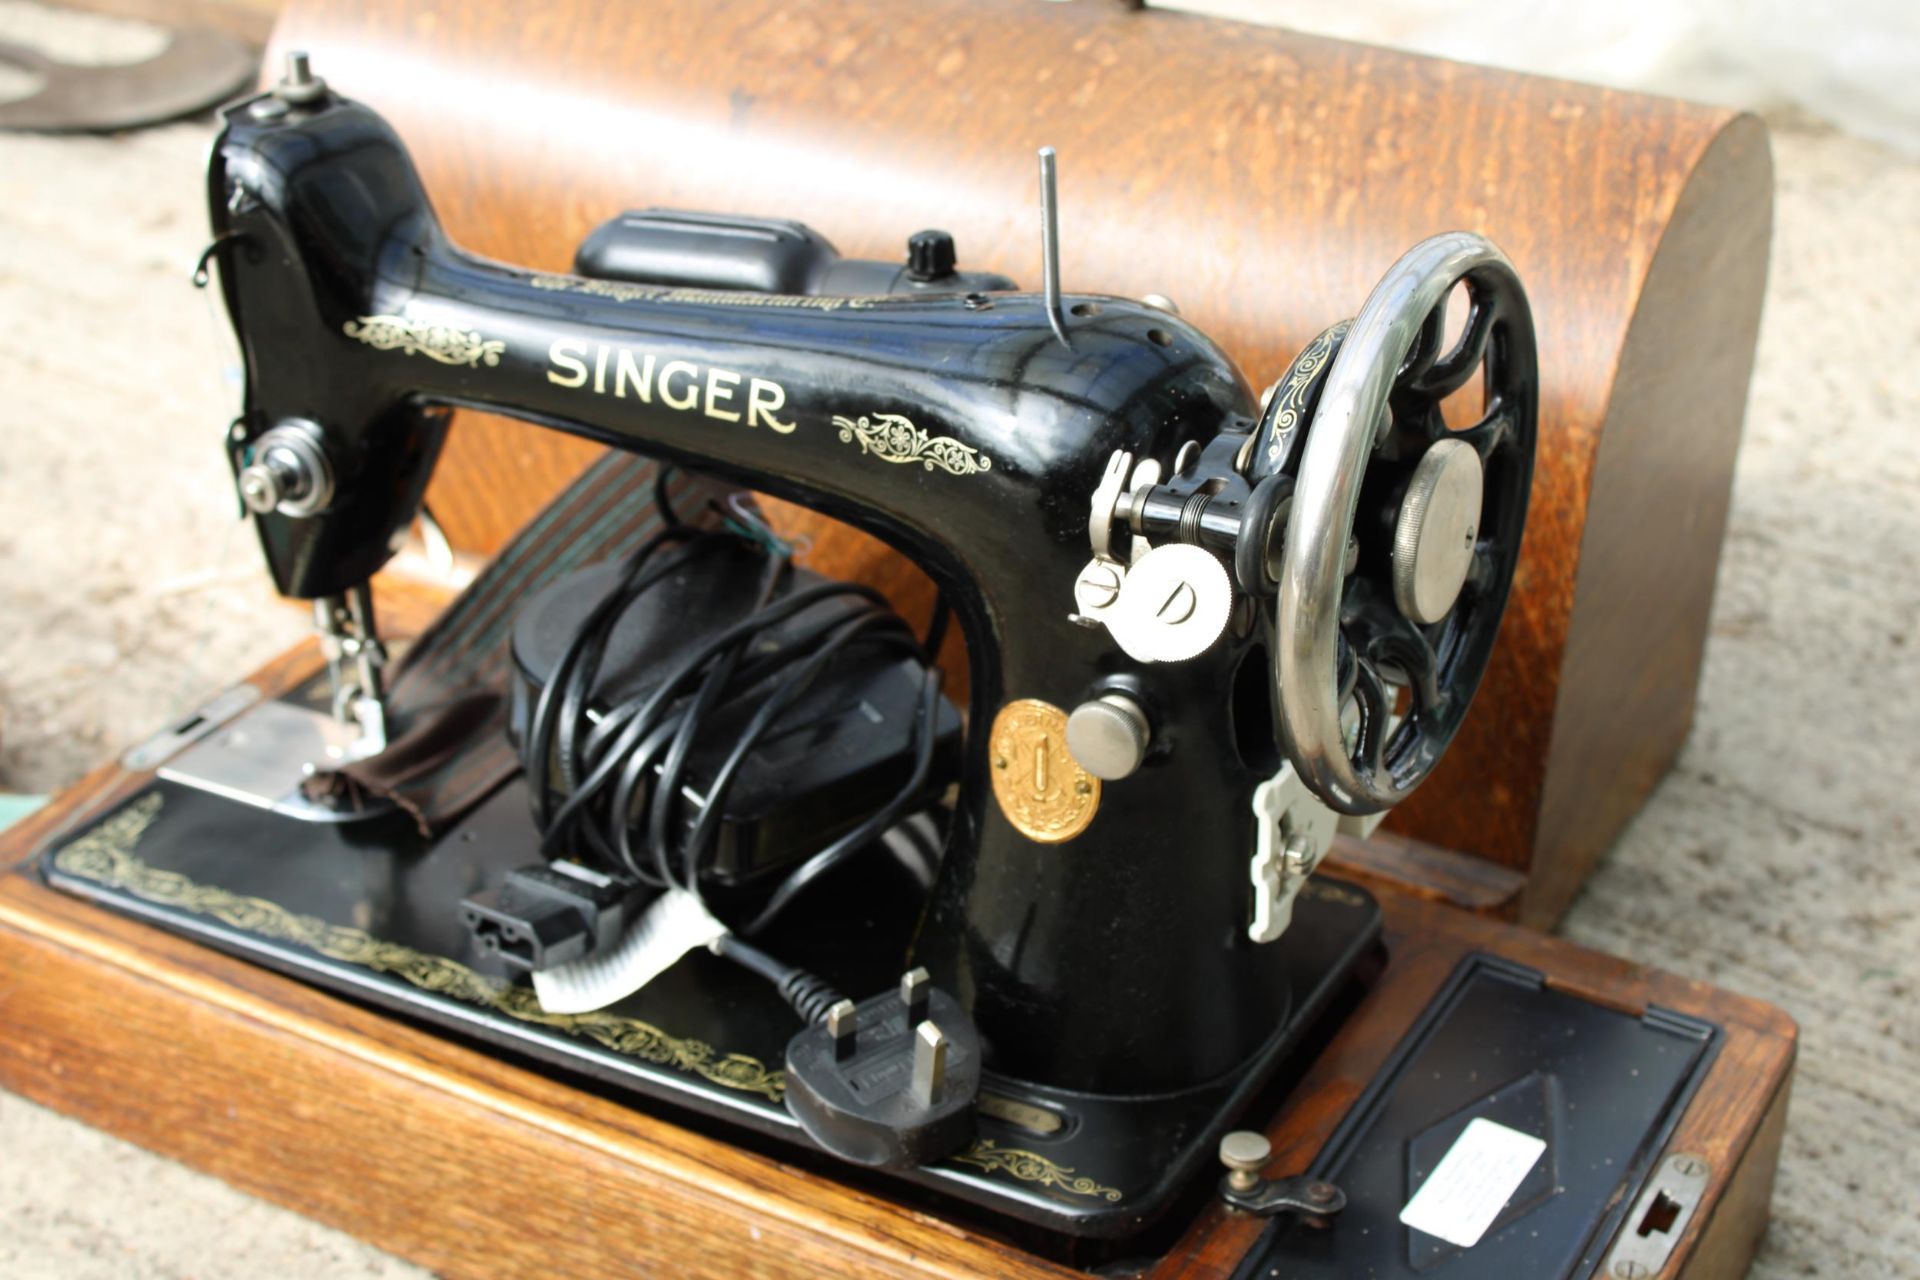 A VINTAGE SINGER SEWING MACHINE WITH WOODEN CARRY CASE, MANUAL AND SPARE PARTS ETC - Image 2 of 8